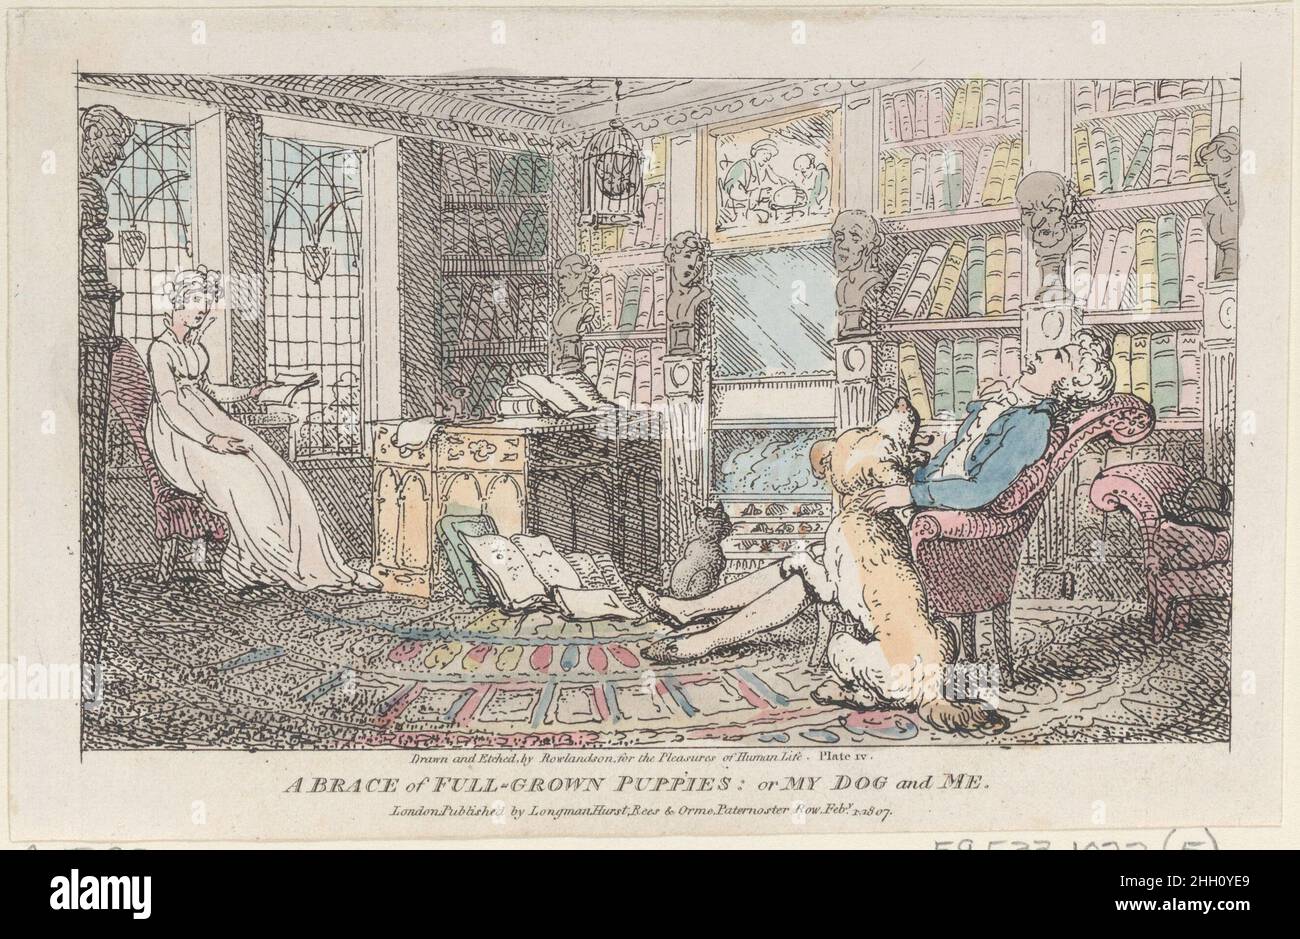 A Brace of Full-grown Puppies: or My Dog and Me 1807 Thomas Rowlandson A young couple in a richly furnished library. The foppish young man at right leans back in an armchair and pets a large dog. At left a pretty young woman holds a book and looks wistfully across at her husband. At right ar four classical busts, a fireplace, a cat, and a gothic revival desk over which hangs a caged bird. Mounted with four other scenes designed and etched by Rowlandson: 59.533.1022(2-4, 6) and title page 59.533.1022(1).. A Brace of Full-grown Puppies: or My Dog and Me. The Pleasures of Human Life. Thomas Rowla Stock Photo